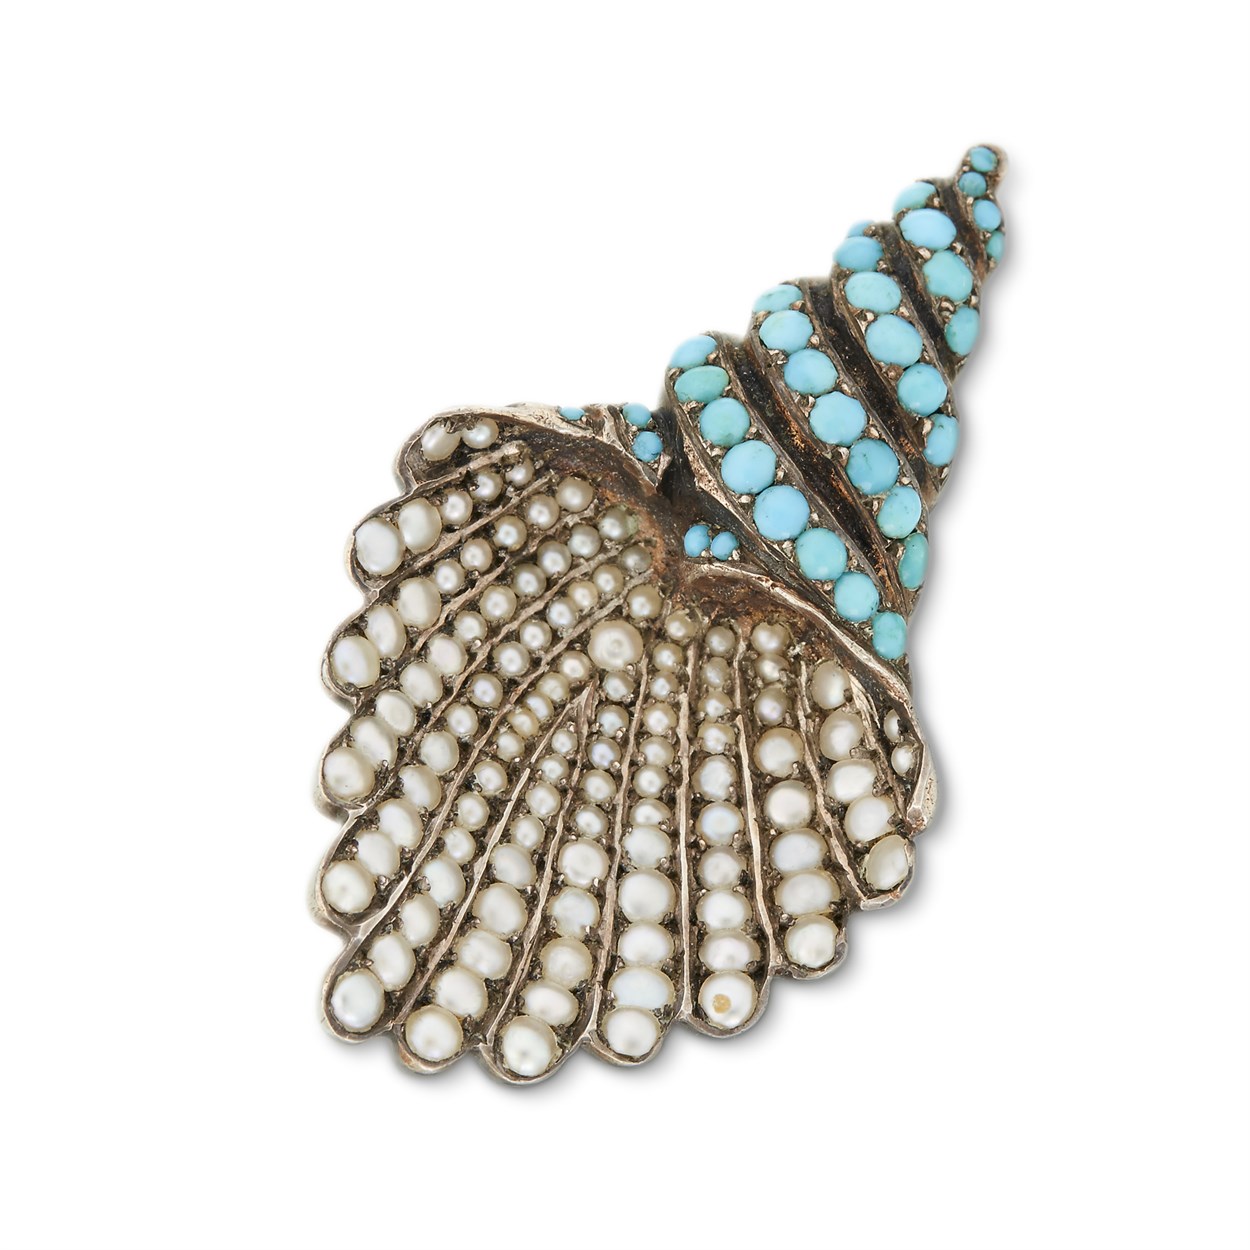 Lot 4 - An antique turquoise and pearl brooch